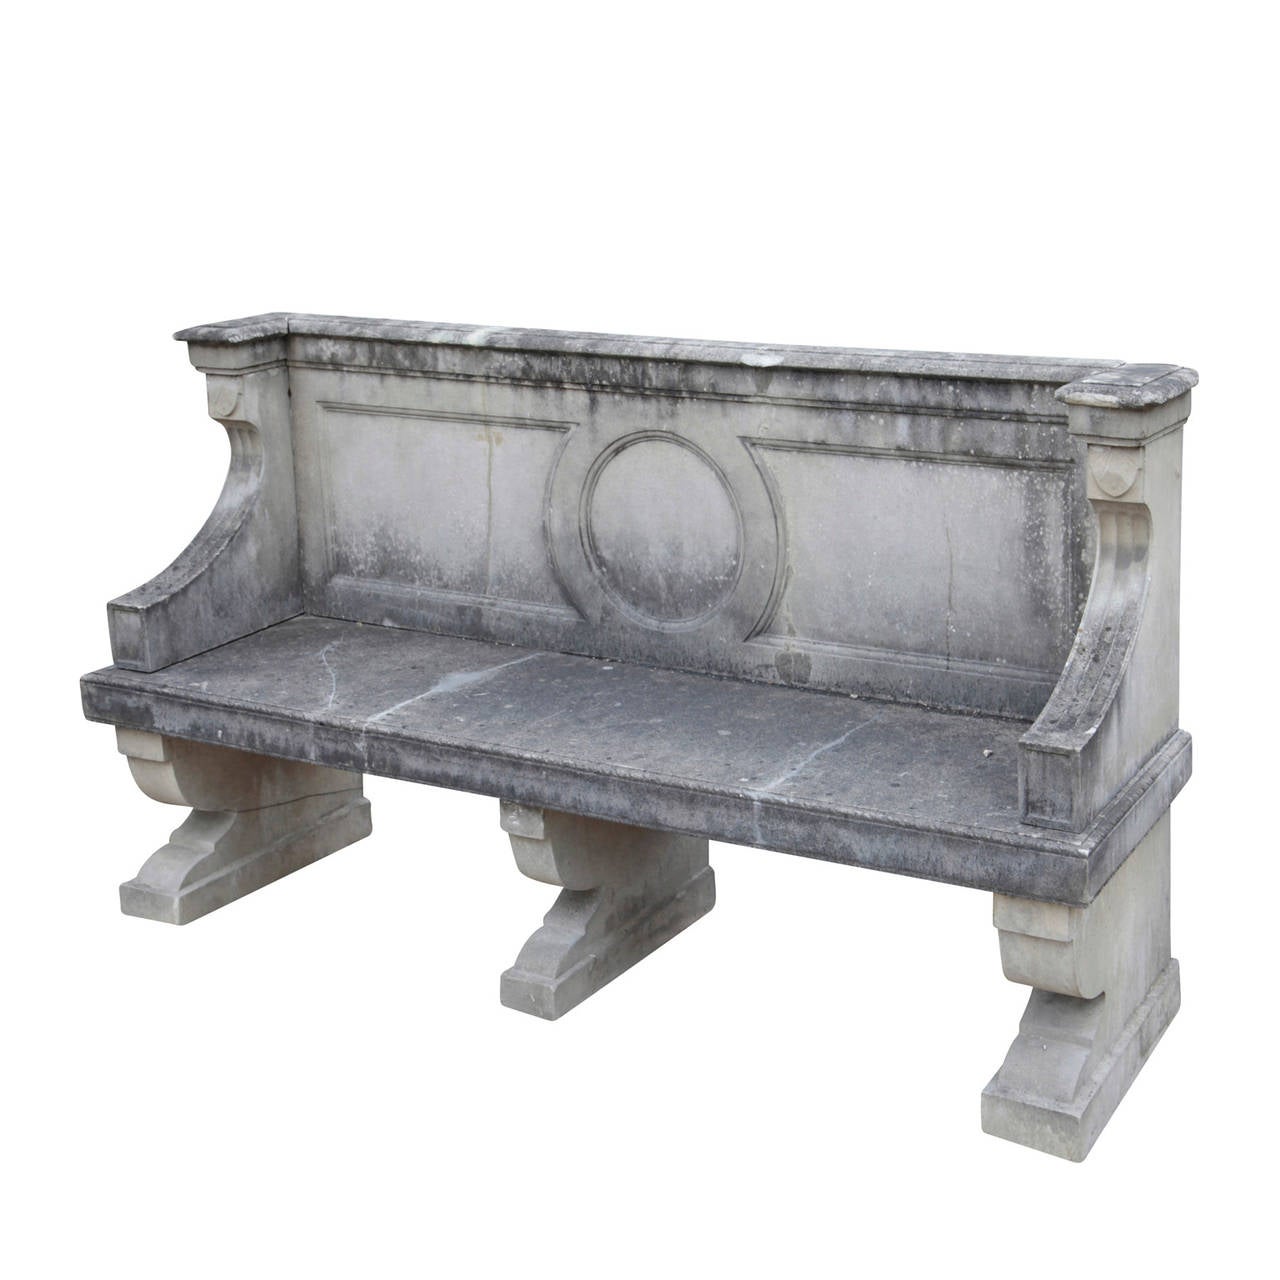 Elegant English Stone cast Park Bench from the 20th Century.
The bench is worked in the clear lines of the Neo-Classicism. It stands on three massive skids-like pedestals and has a smooth rectangular seat. Concave curved armrests are setback a